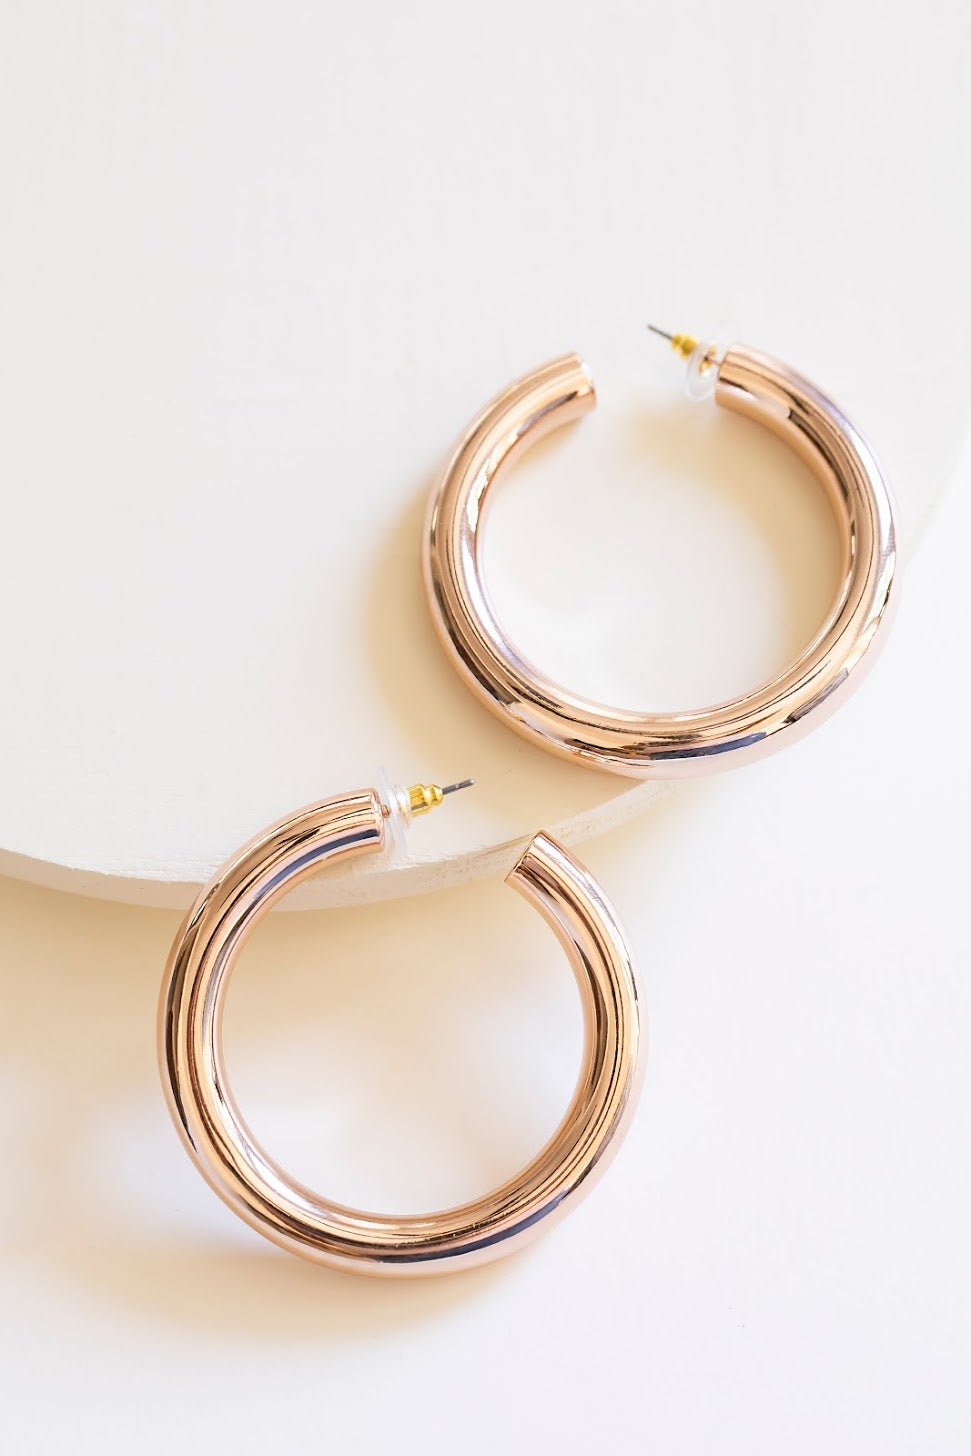 Cameron Gold Hoop Earrings | Classic Smooth Gold Hoops